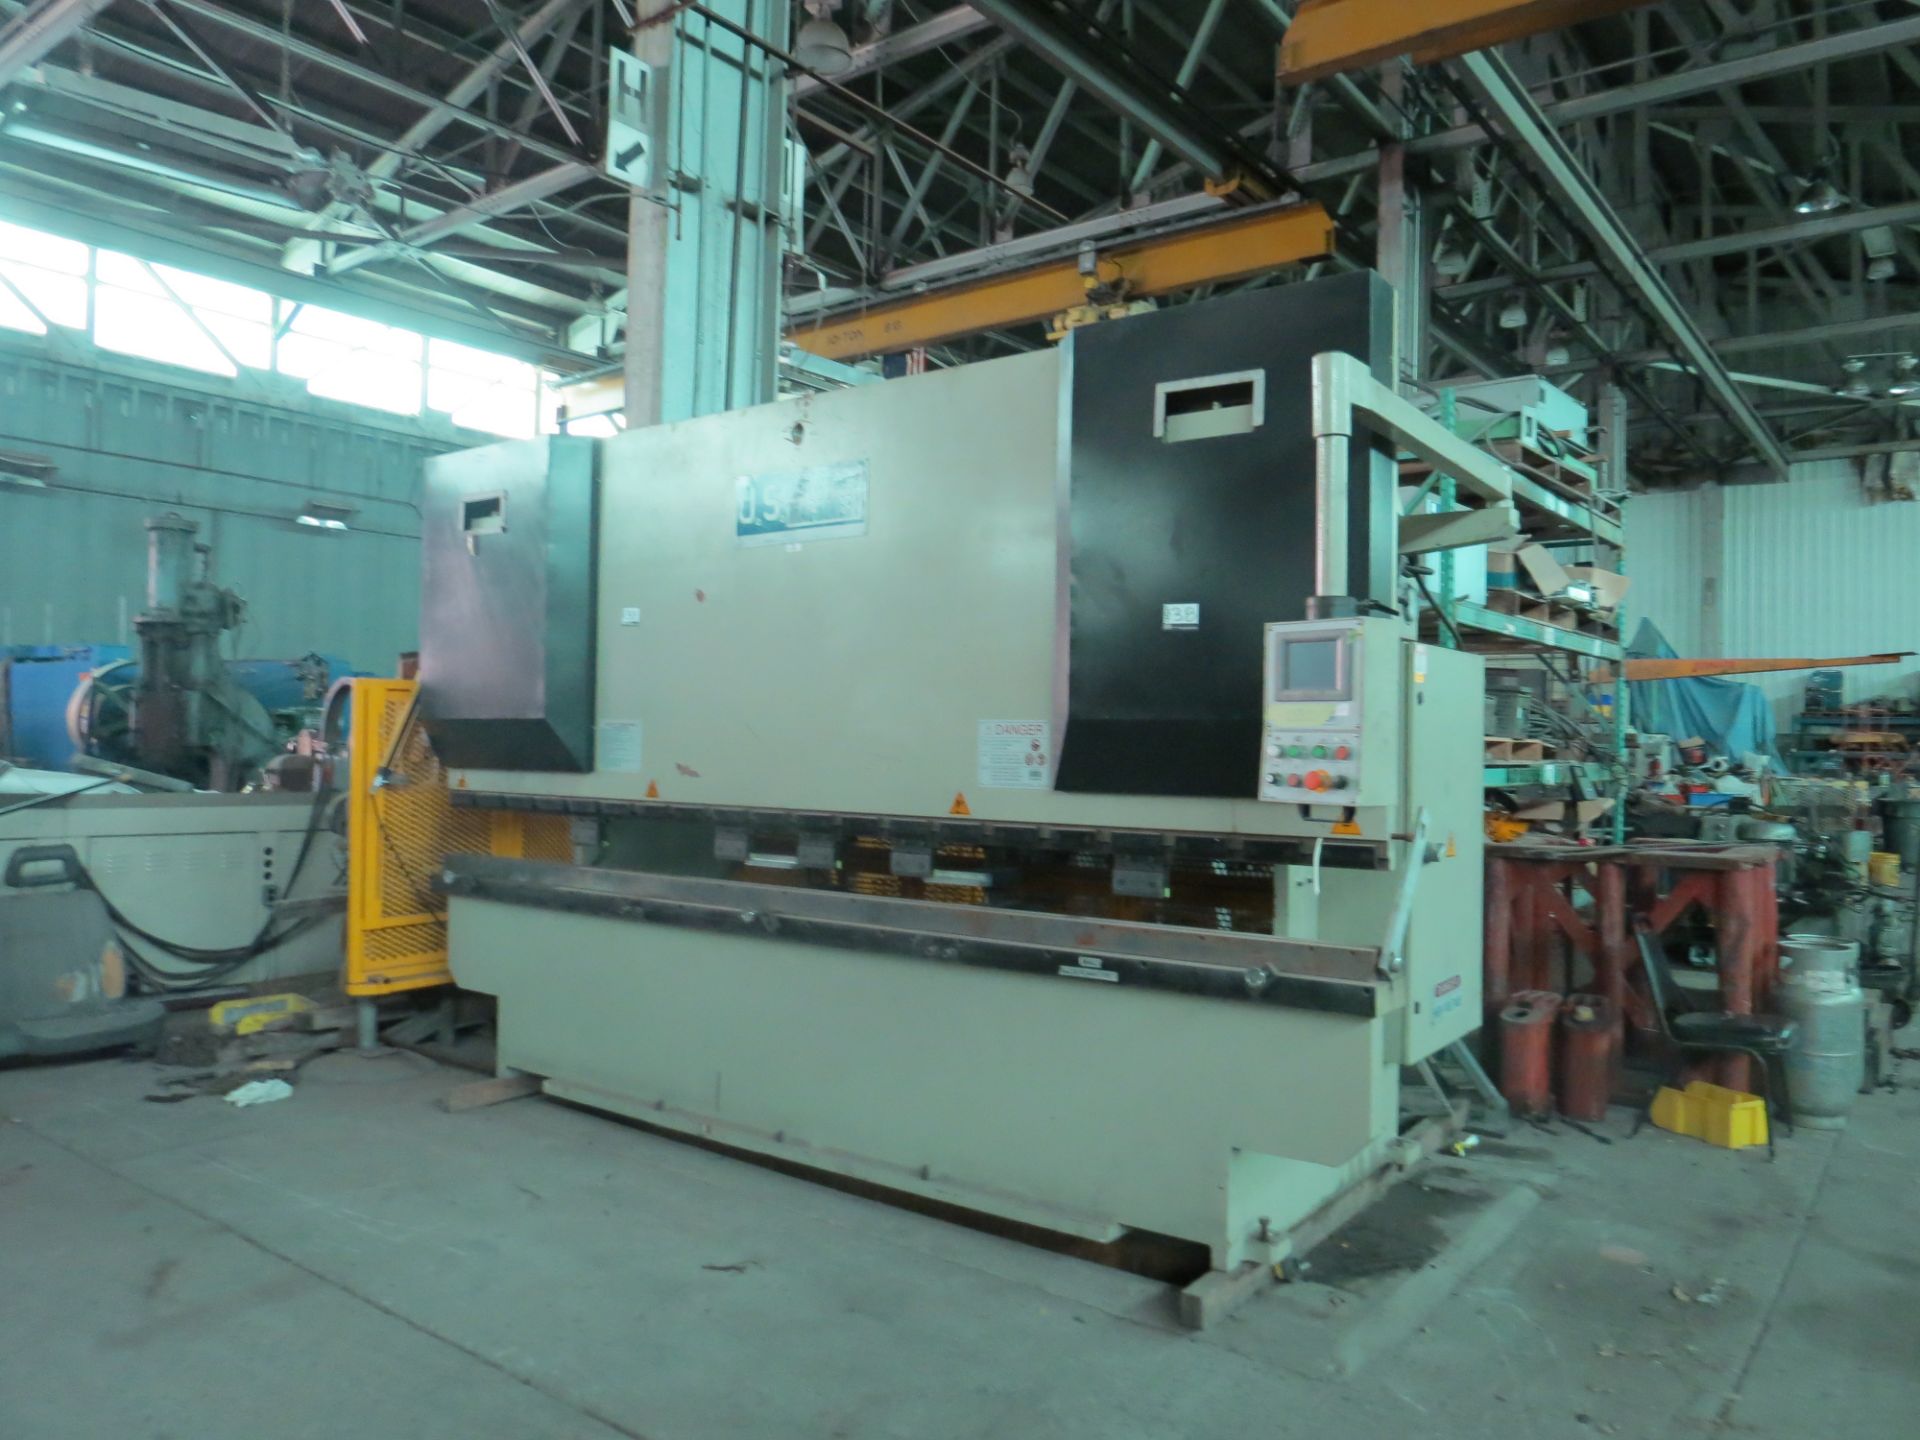 U-S Industrial Machinery 12 FT 155 Ton Hydraulic Press Brake w/ Back Gages w/ Light Curtains - Image 4 of 11